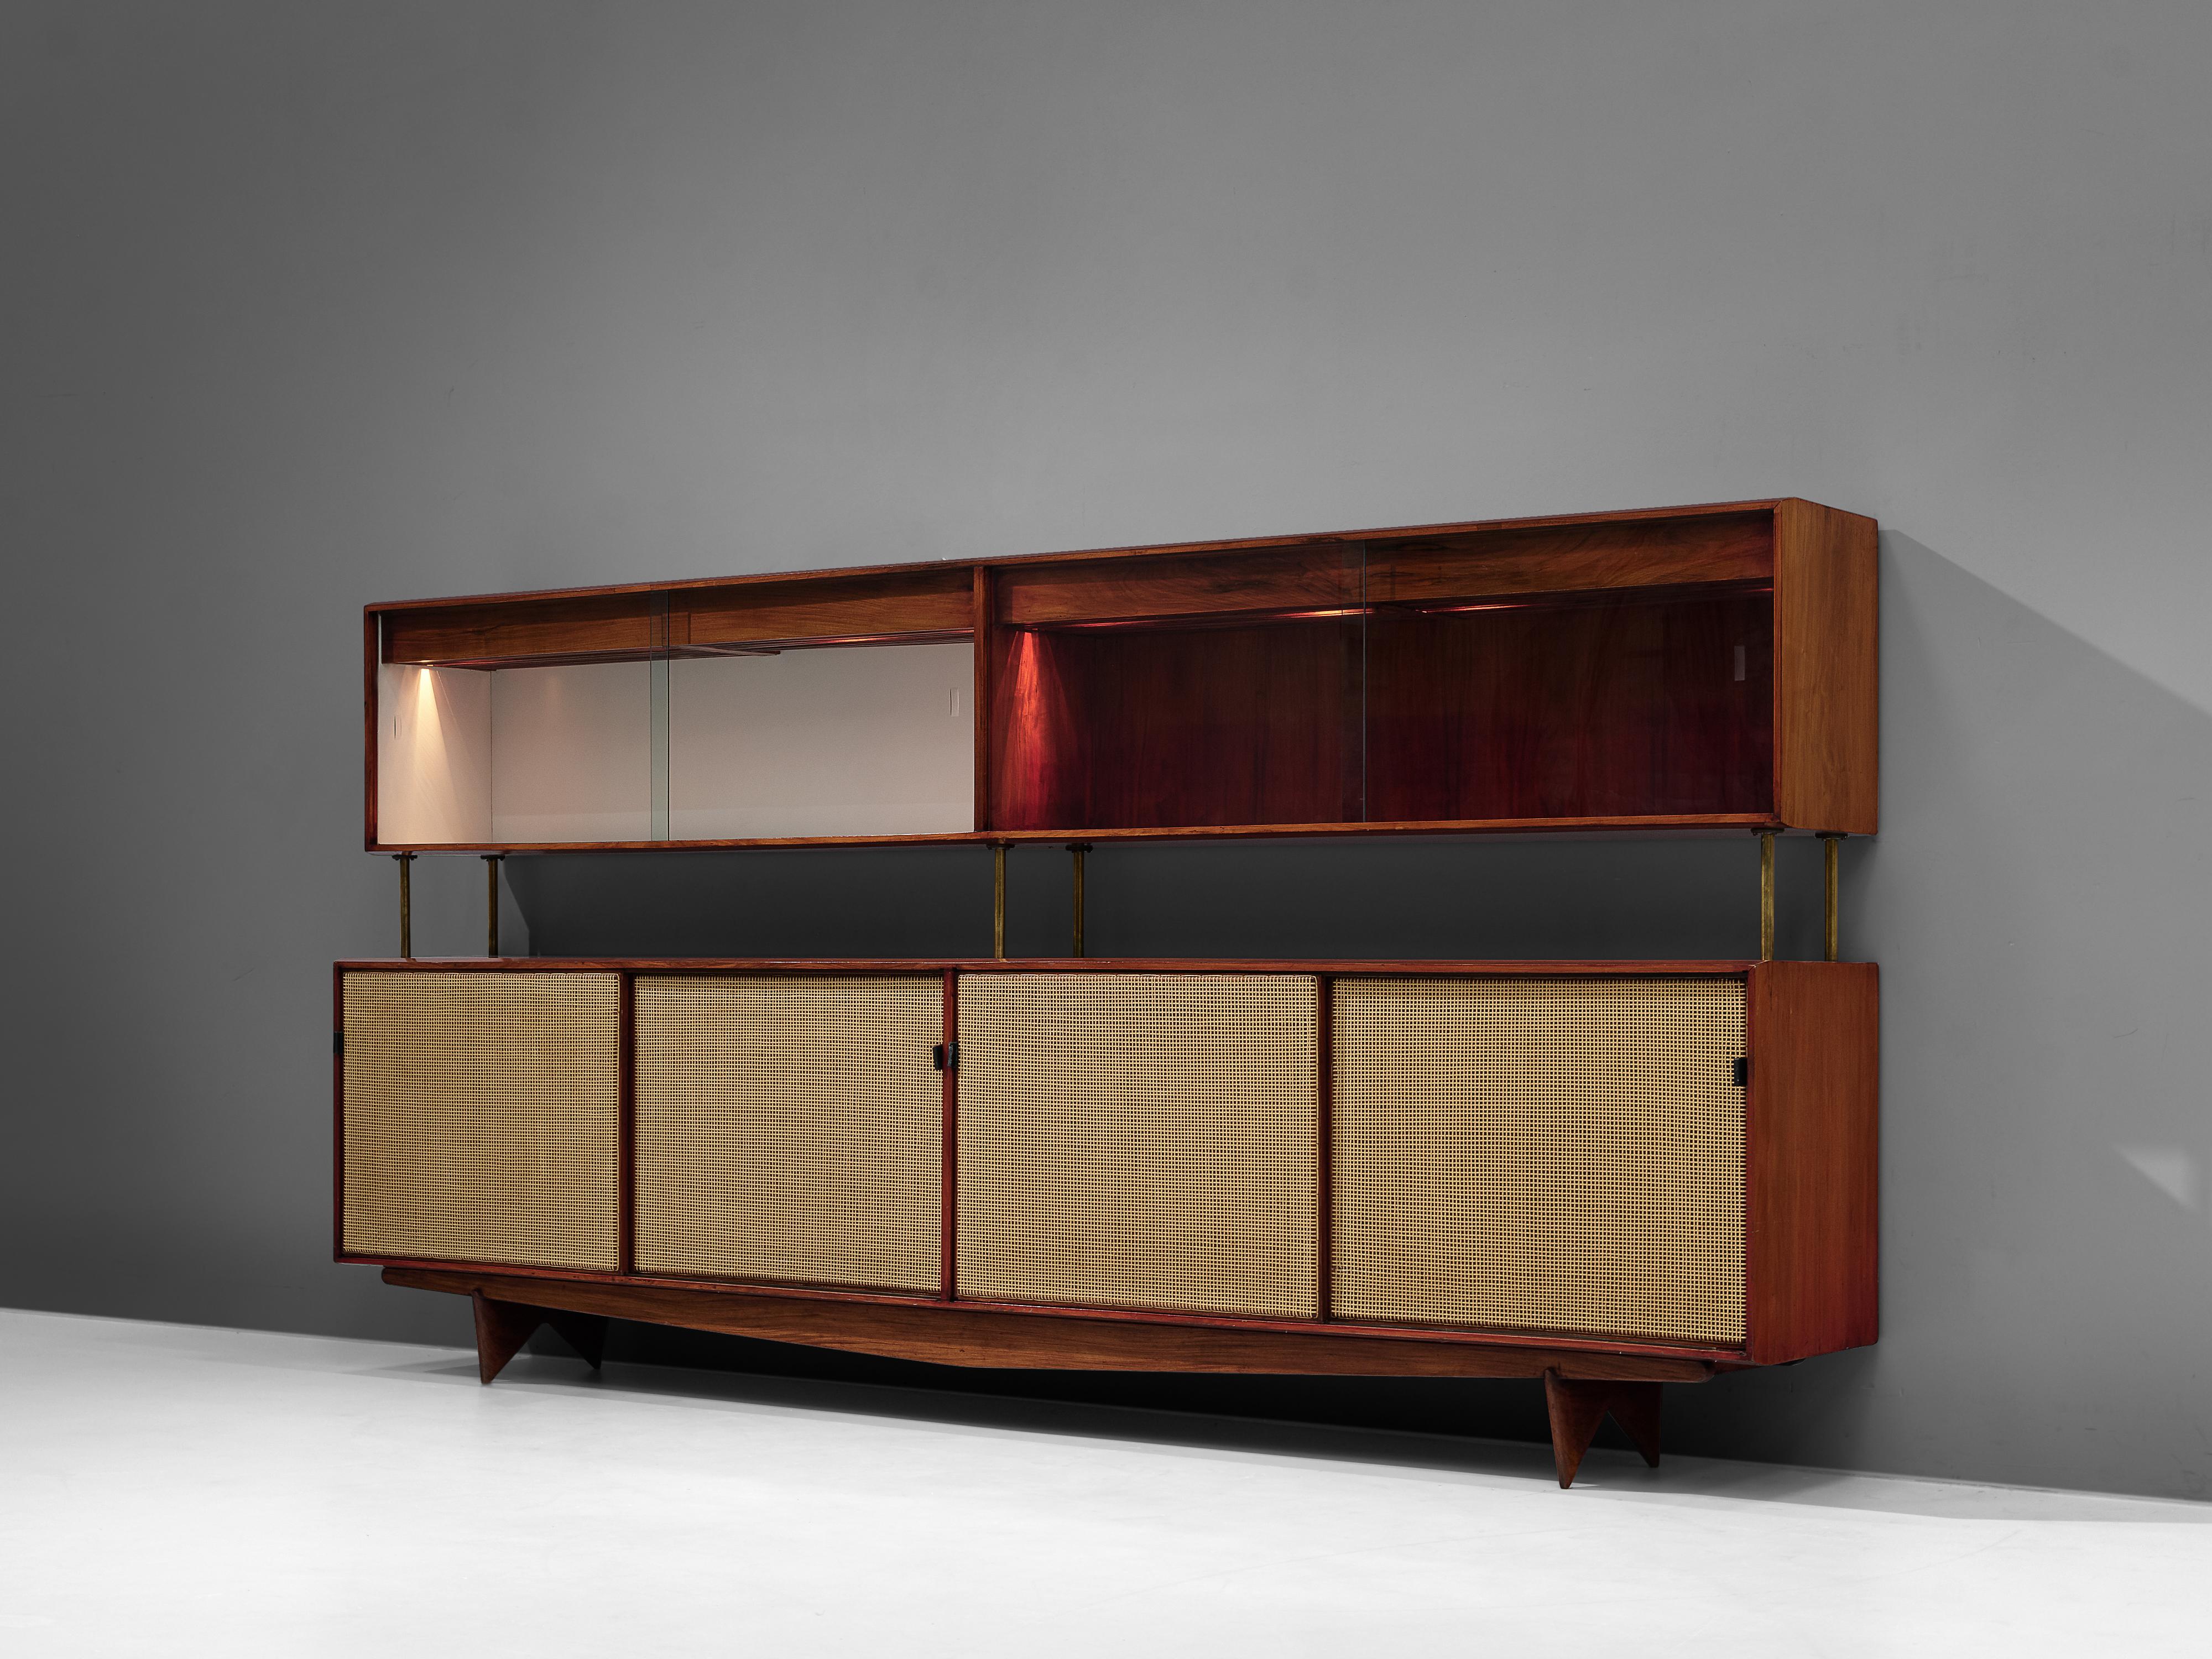 Martin Eisler for Forma, sideboard, Brazilian walnut, glass, brass, seagrass, leather, Brazil, 1950s

Rare Brazilian sideboard by Martin Eisler for Forma. The sideboard is structured in two compartments. At the bottom there is cabinet with four